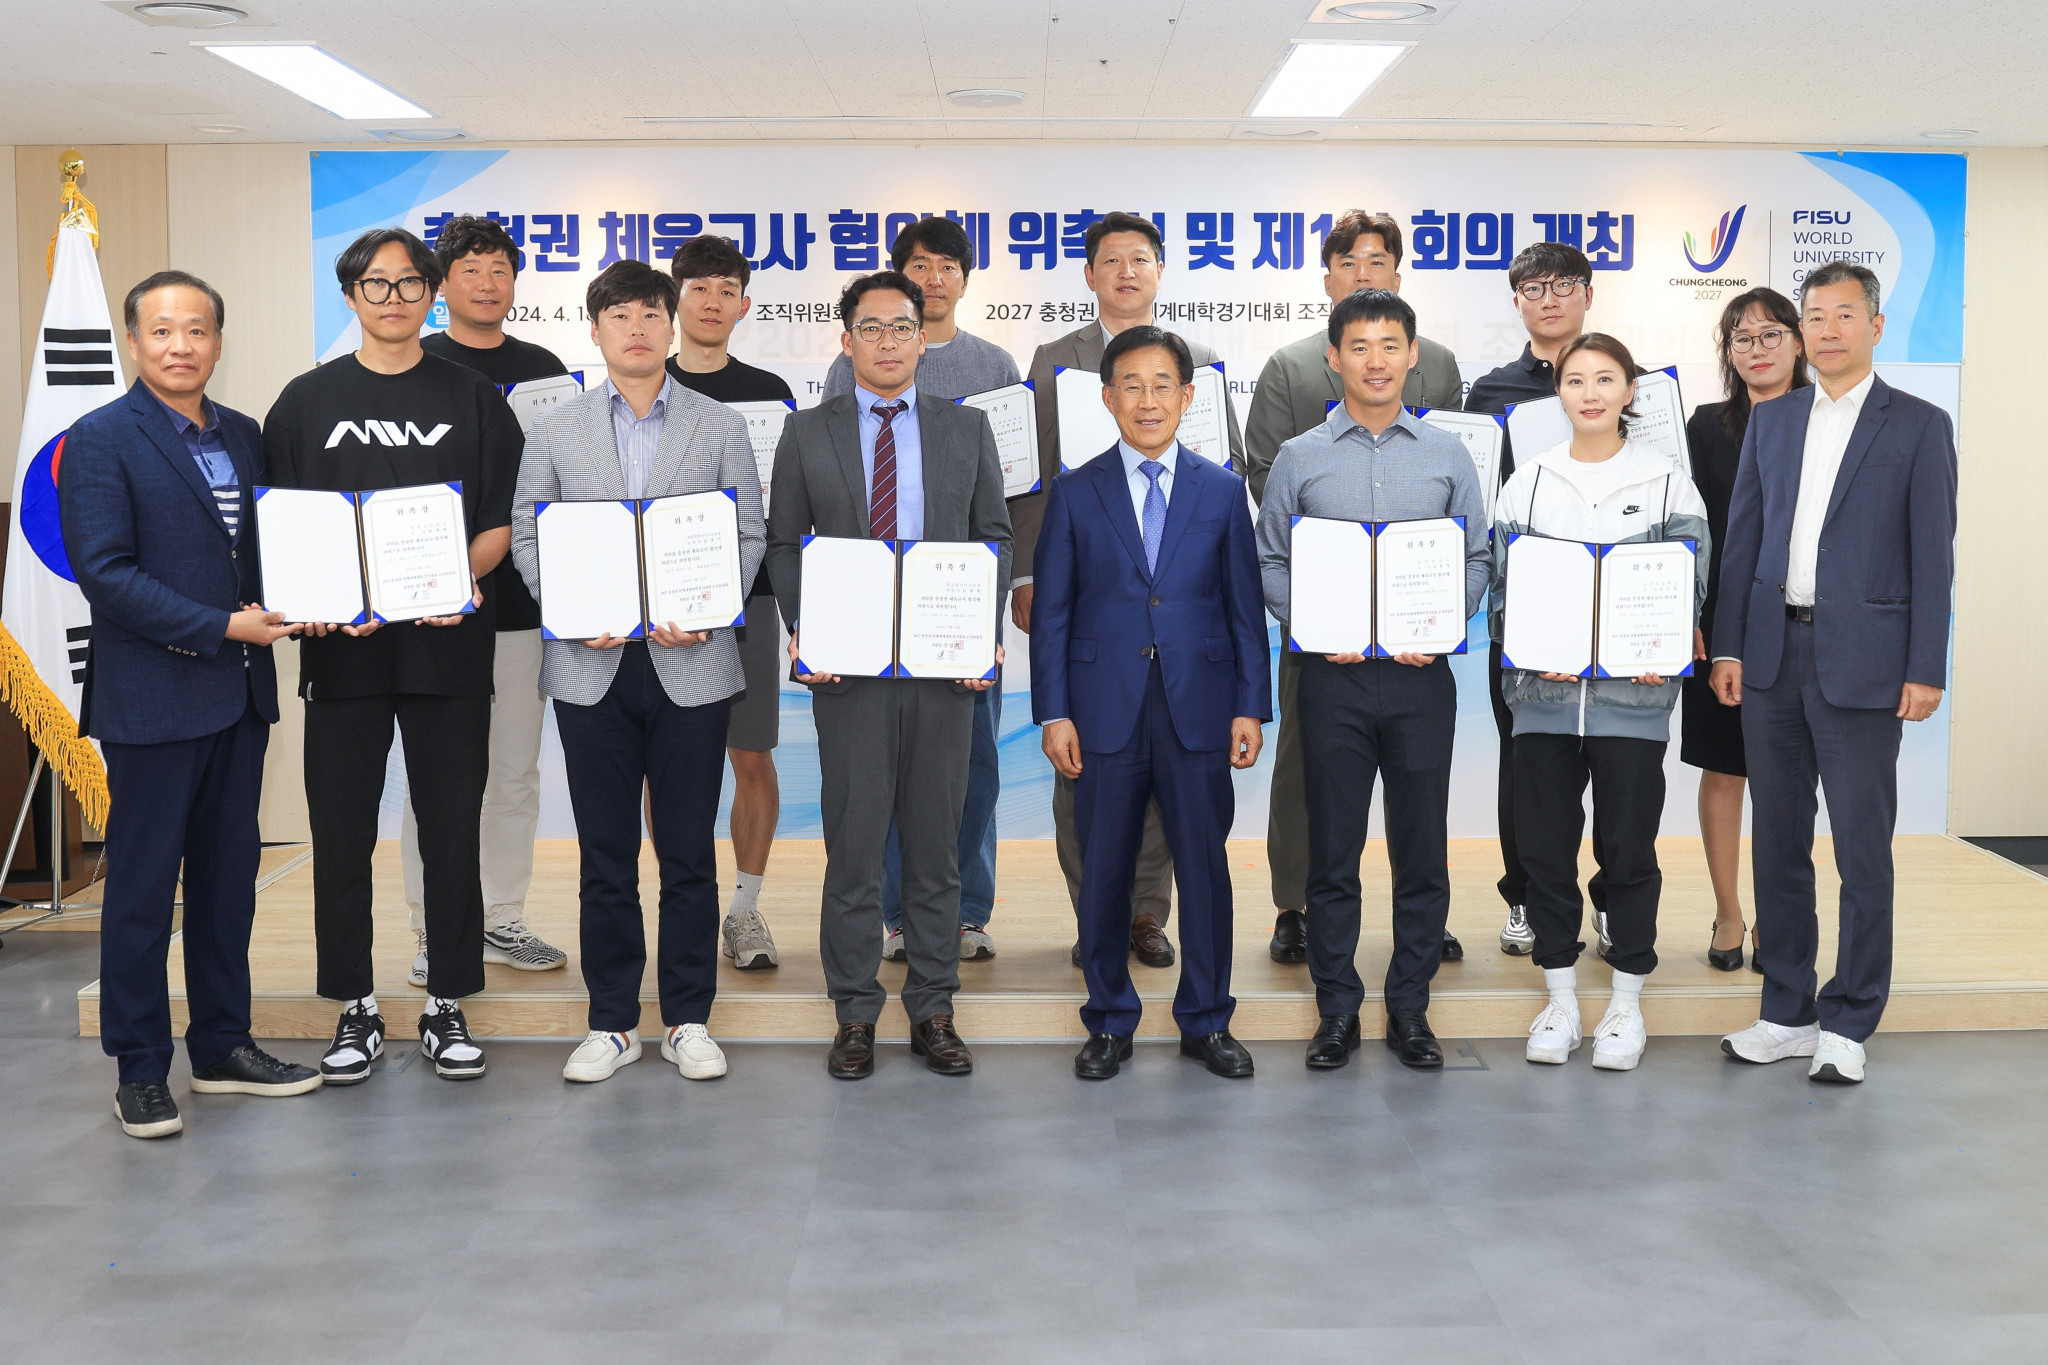 CHUOC held the first meeting of the Chungcheong physical education teachers' consortium. FISU